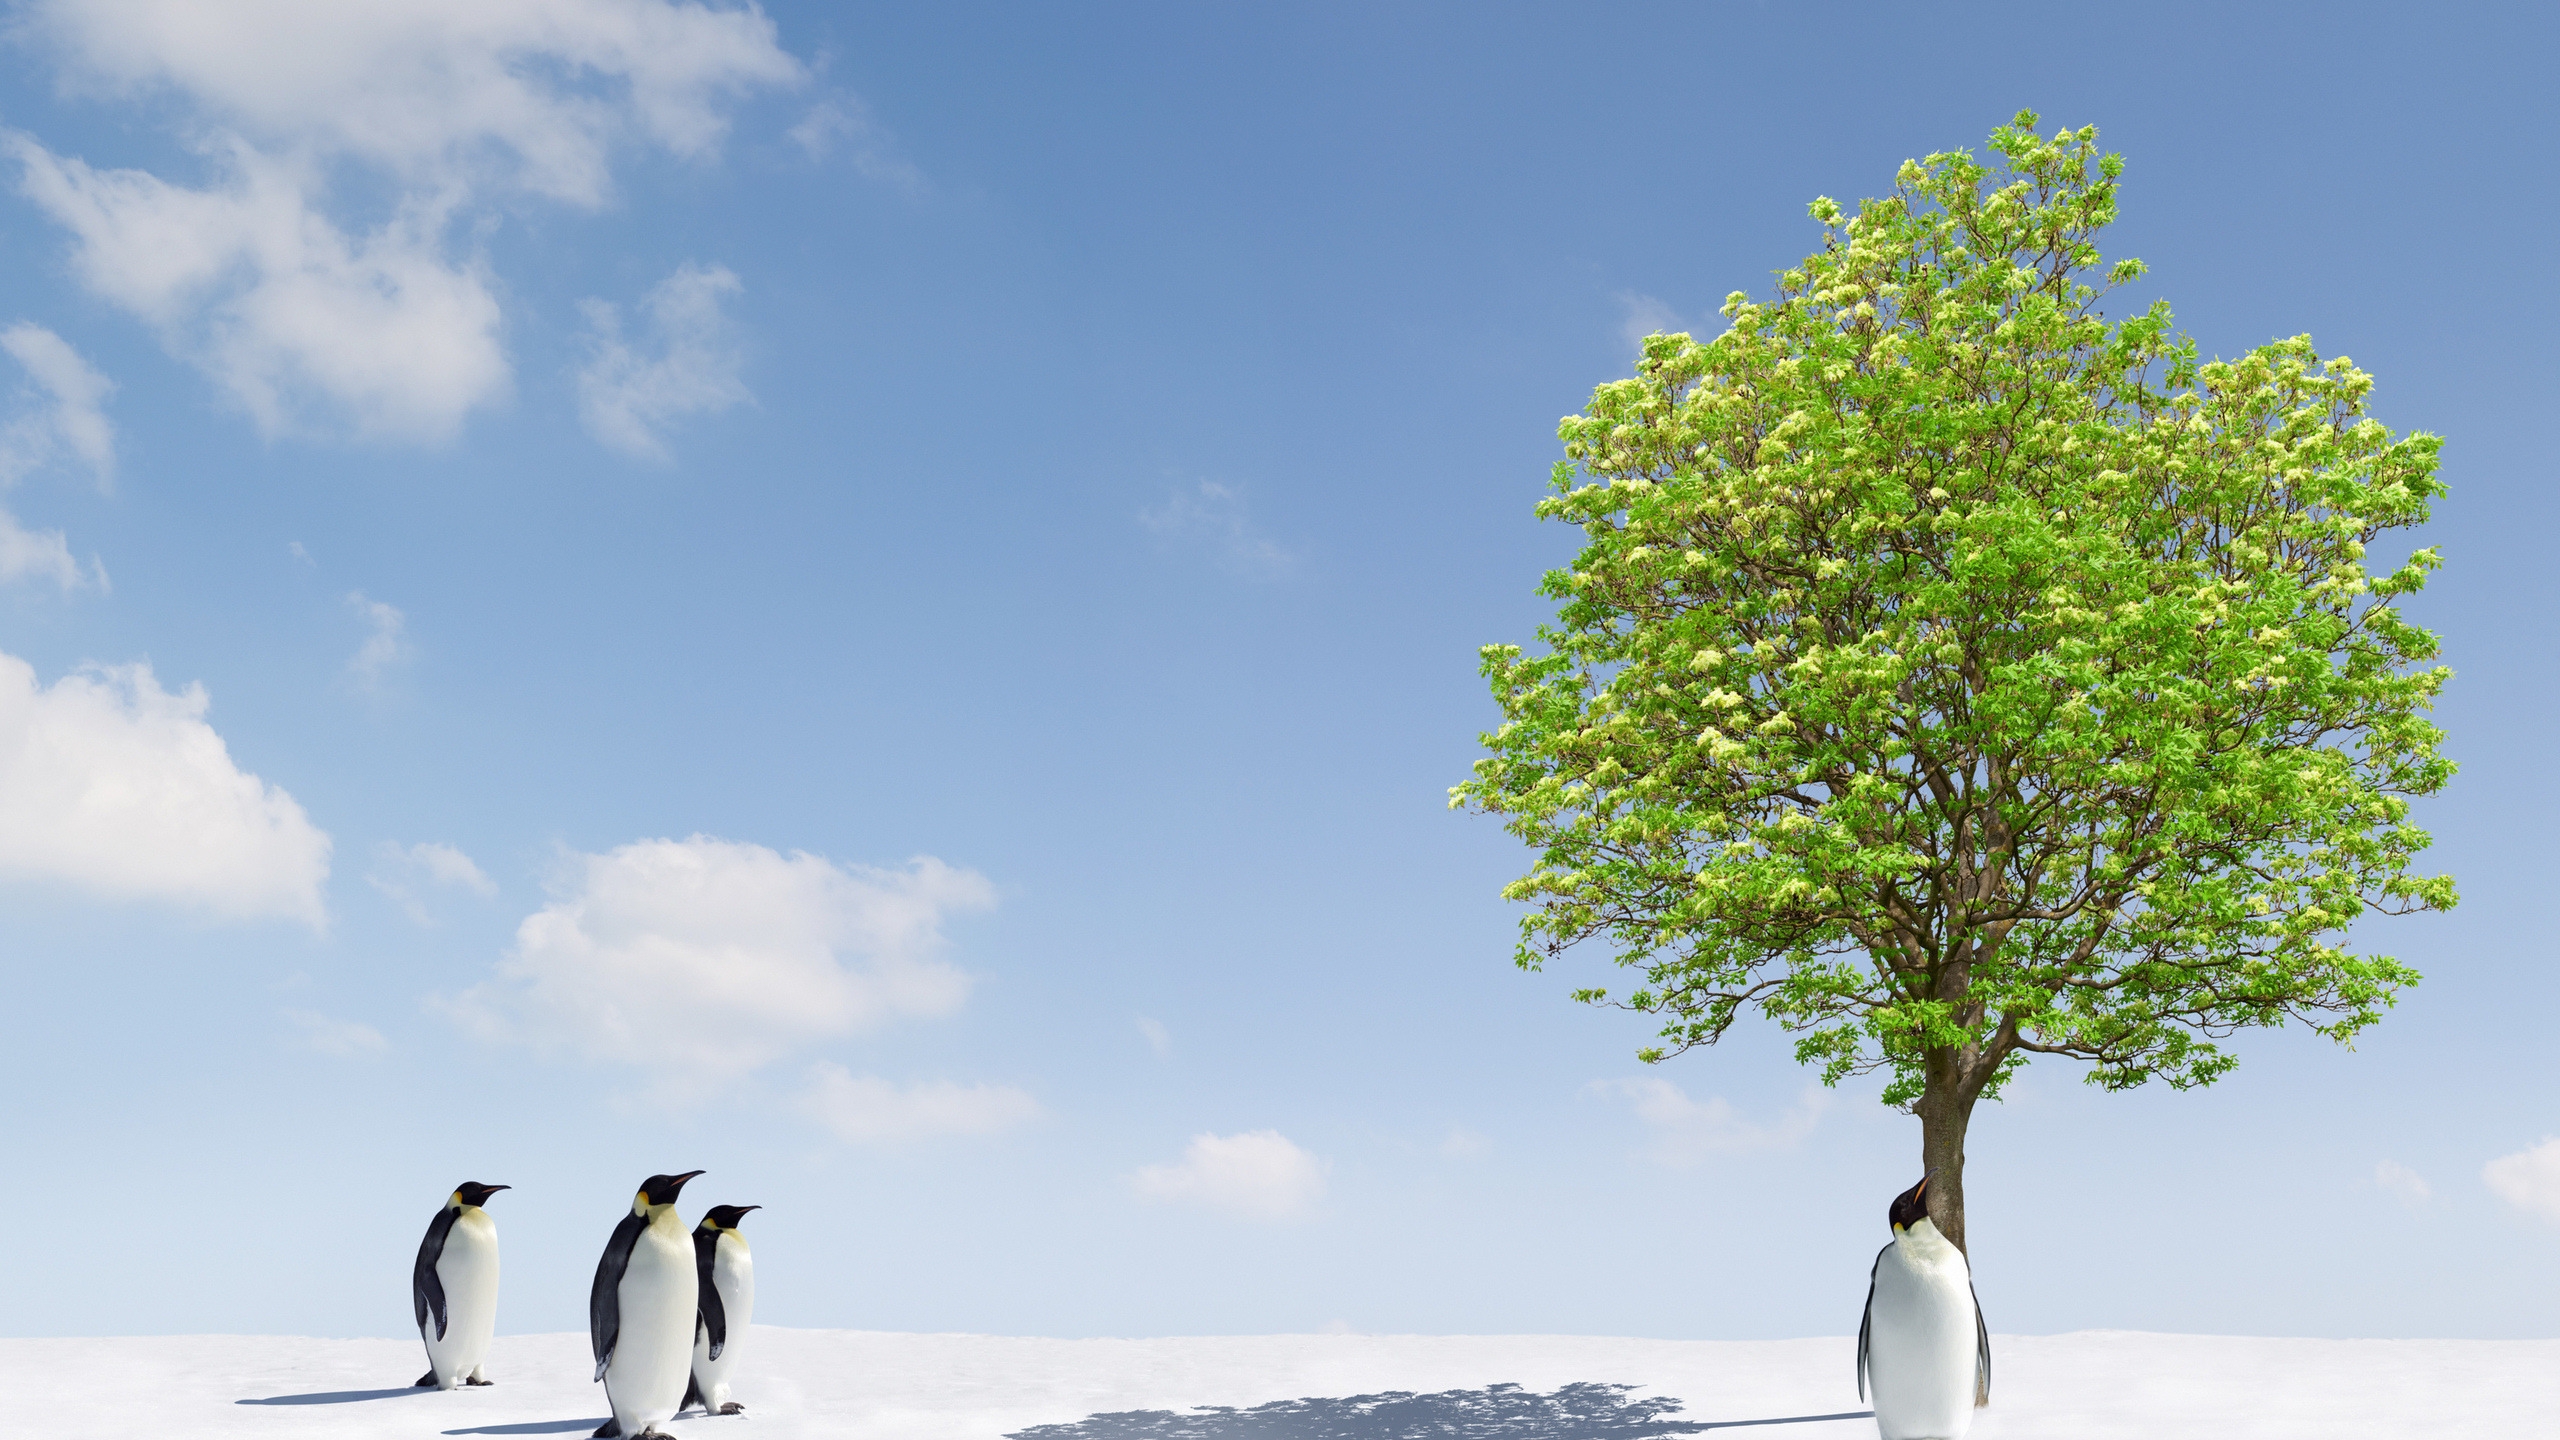 Penguins and Green Tree for 2560x1440 HDTV resolution